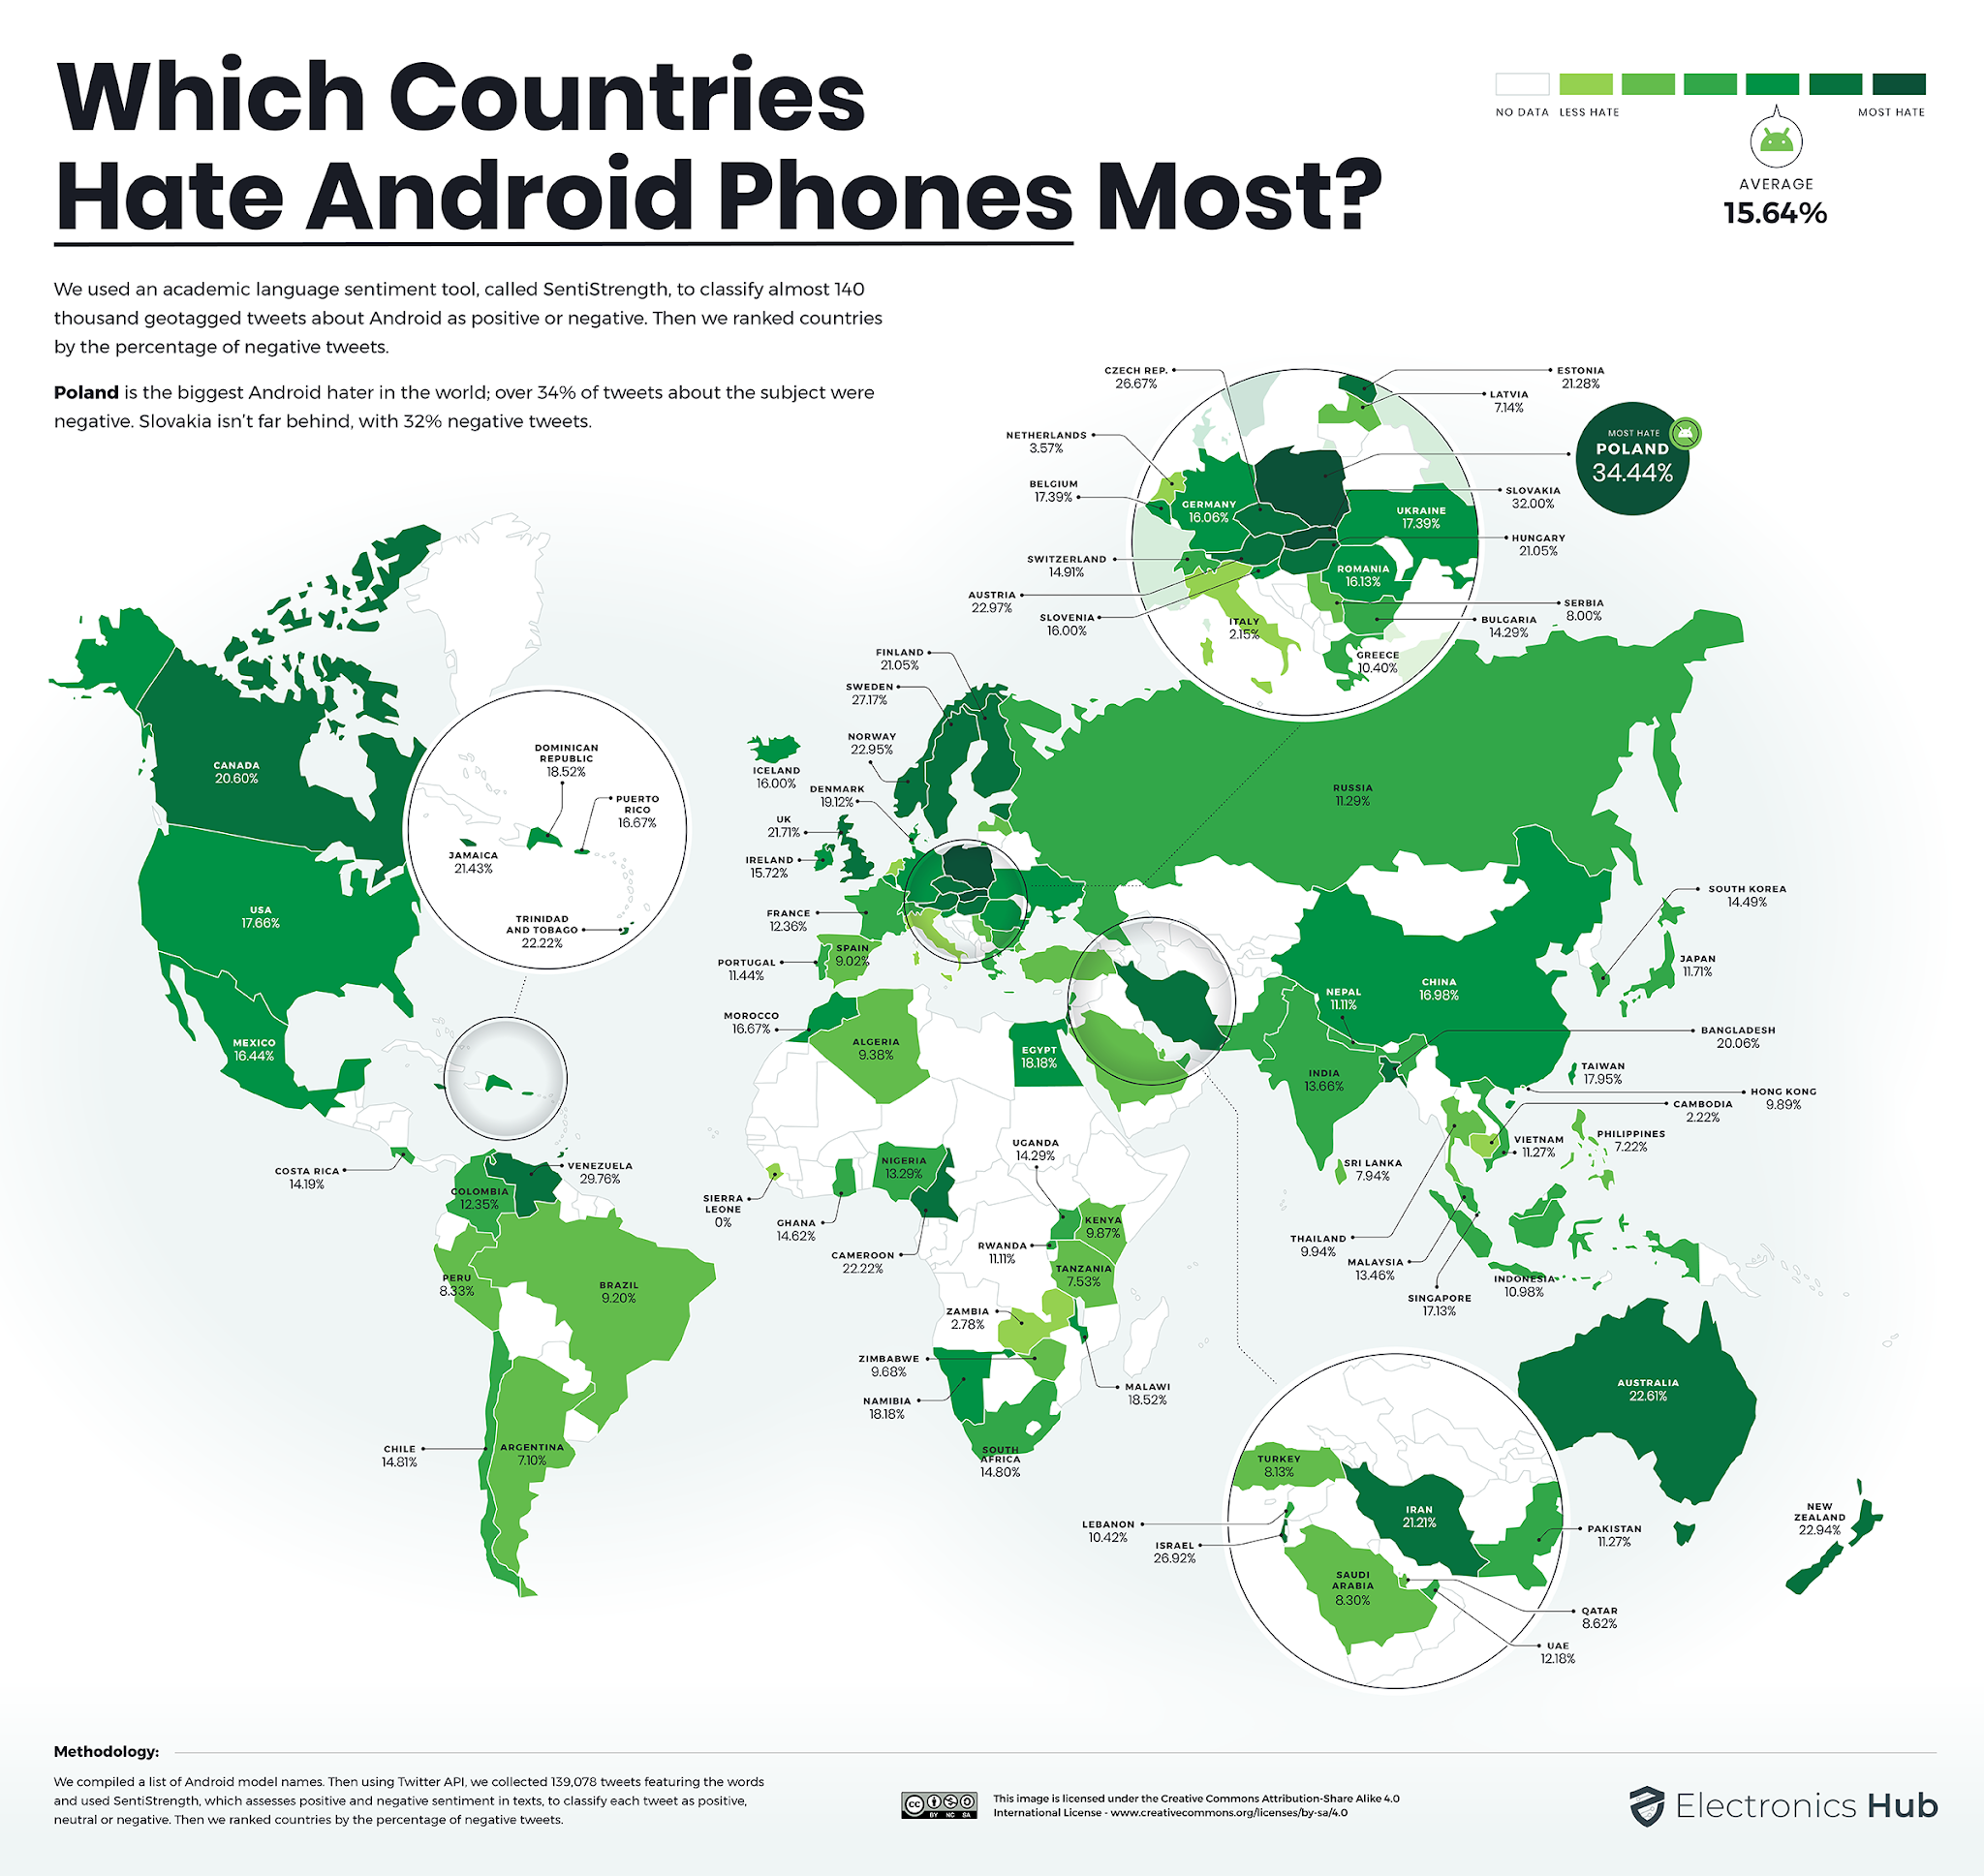 Does the world love Apple or Android more?